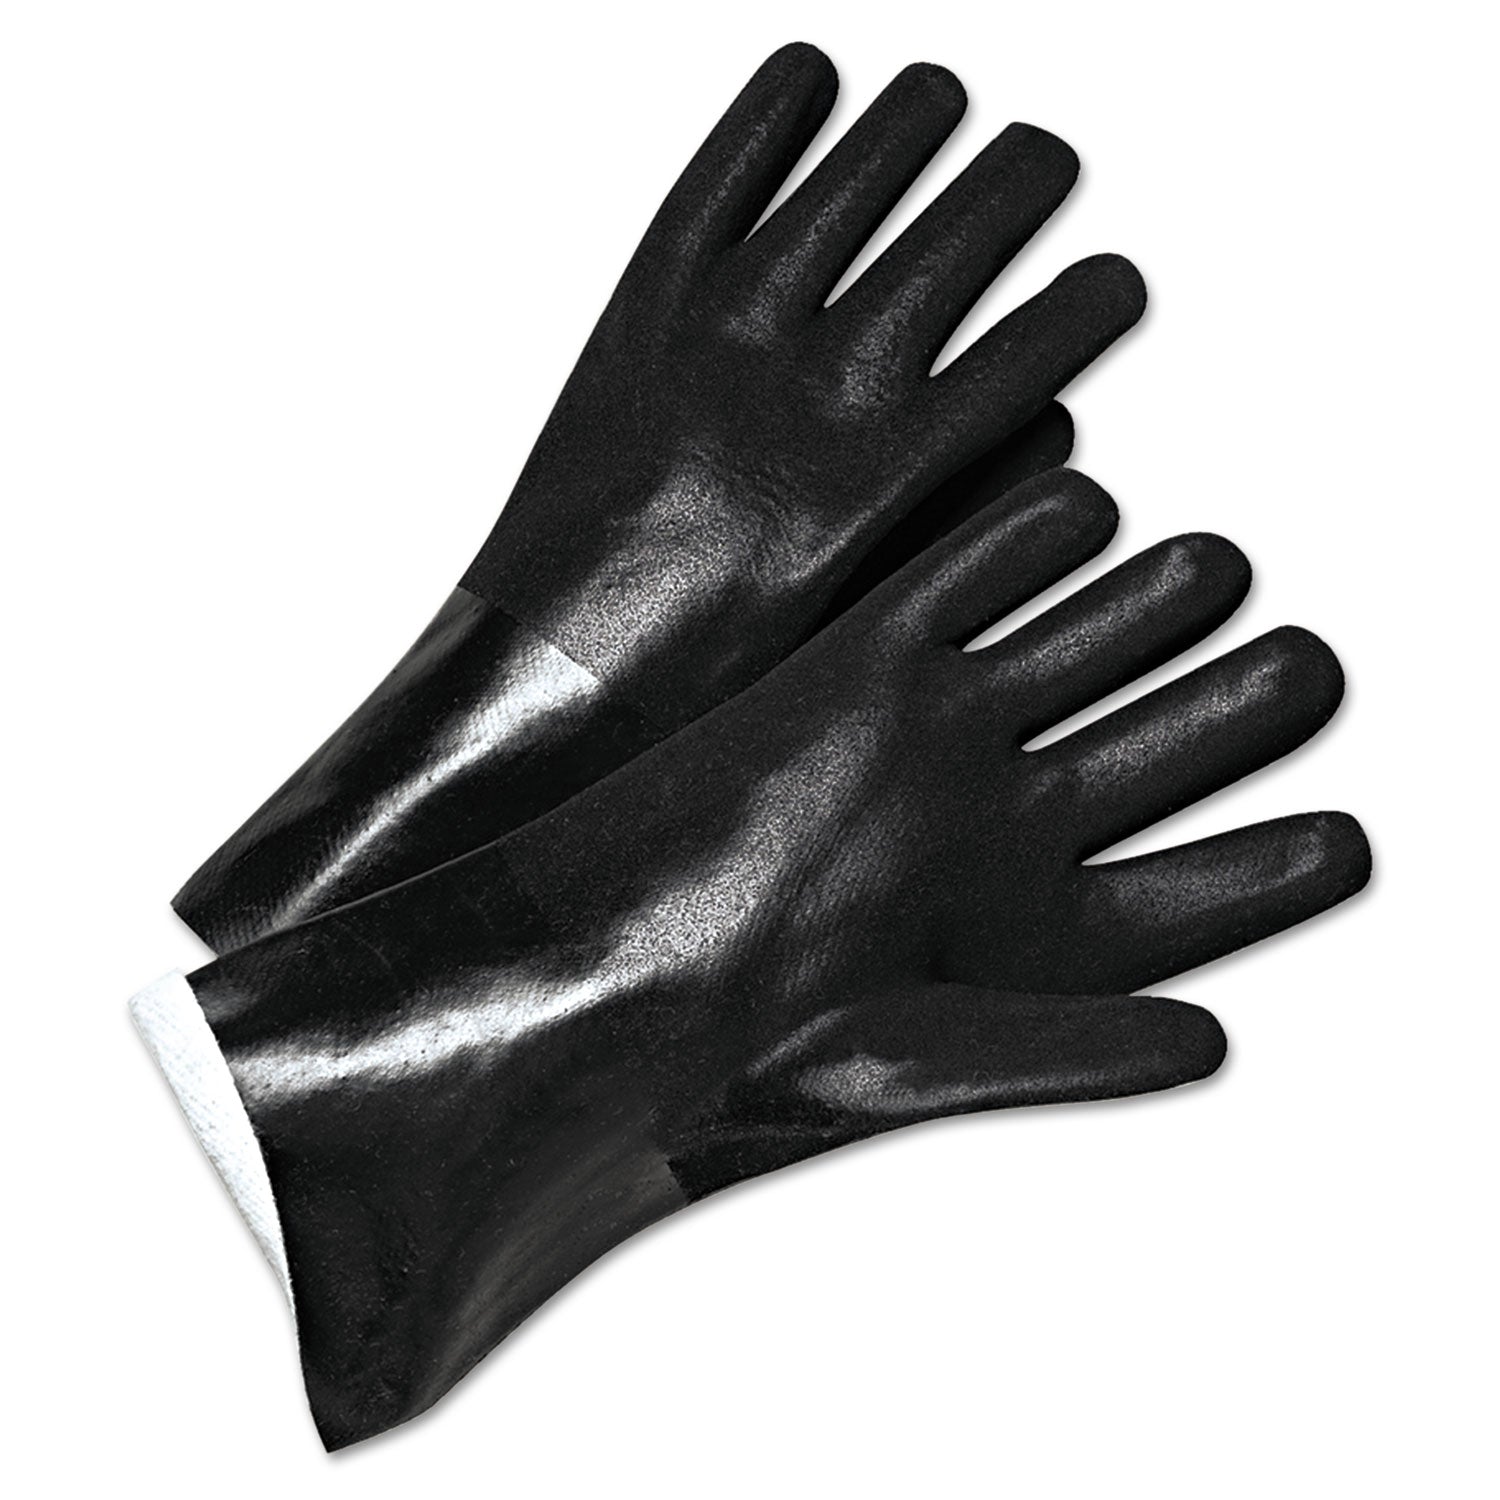 pvc-coated-jersey-lined-gloves-14-in-long-black-mens-12-pack_anr7400 - 1